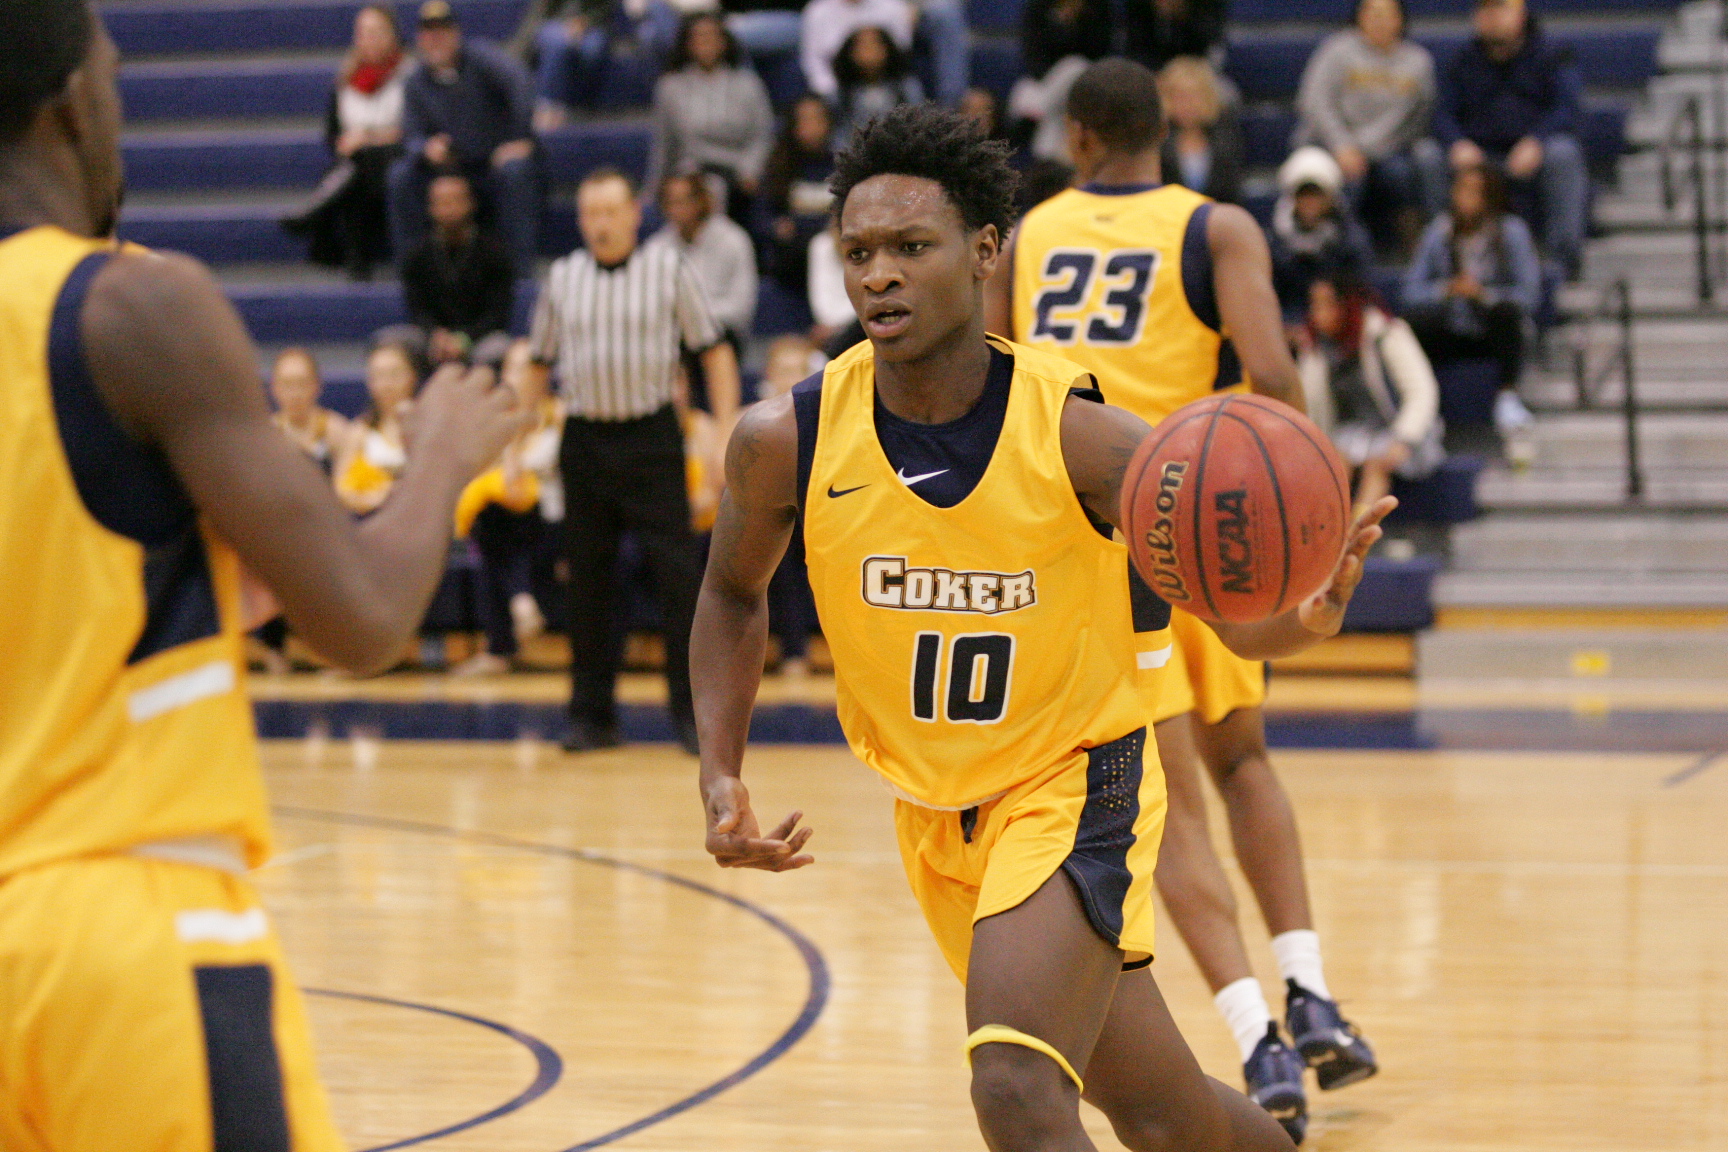 Men's Basketball Rallies to Force Overtime, but Falls Short to Mars Hill in Conference Action